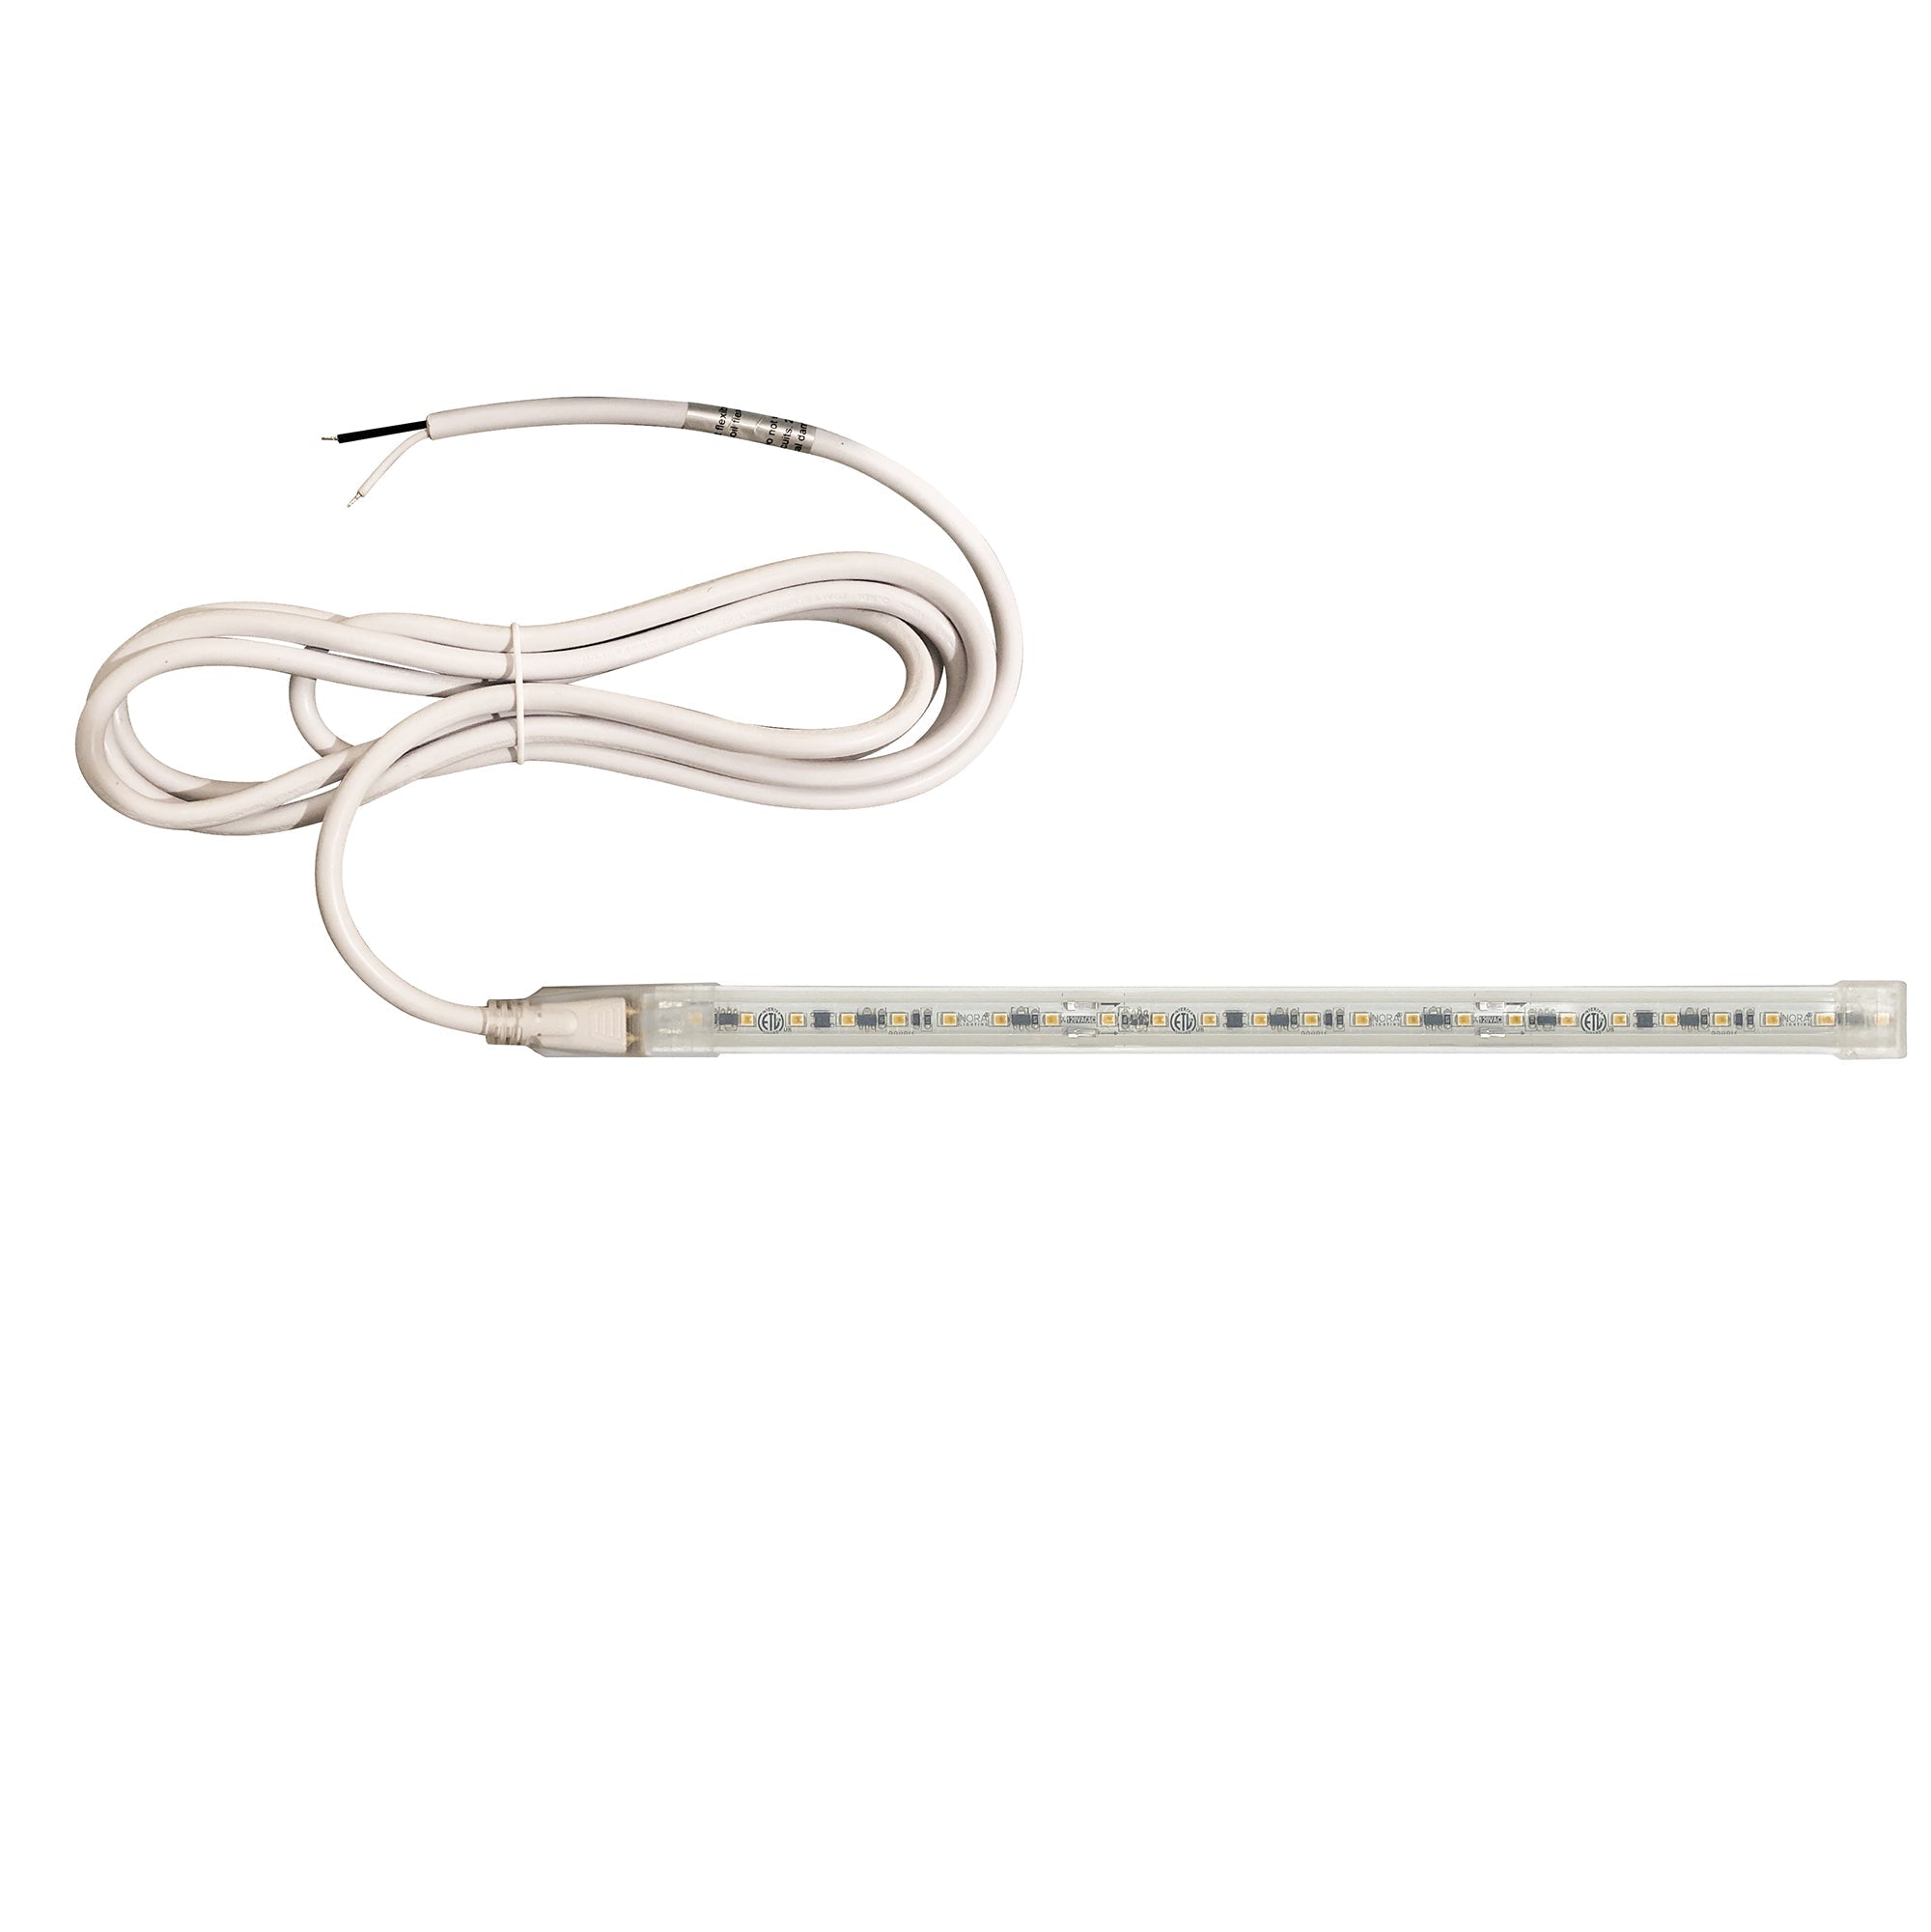 Nora Lighting NUTP13-W8-8-12-930/HW - Accent / Undercabinet - Custom Cut 8-ft, 8-in 120V Continuous LED Tape Light, 330lm / 3.6W per foot, 3000K, w/ Mounting Clips and 8' Hardwired Power Cord